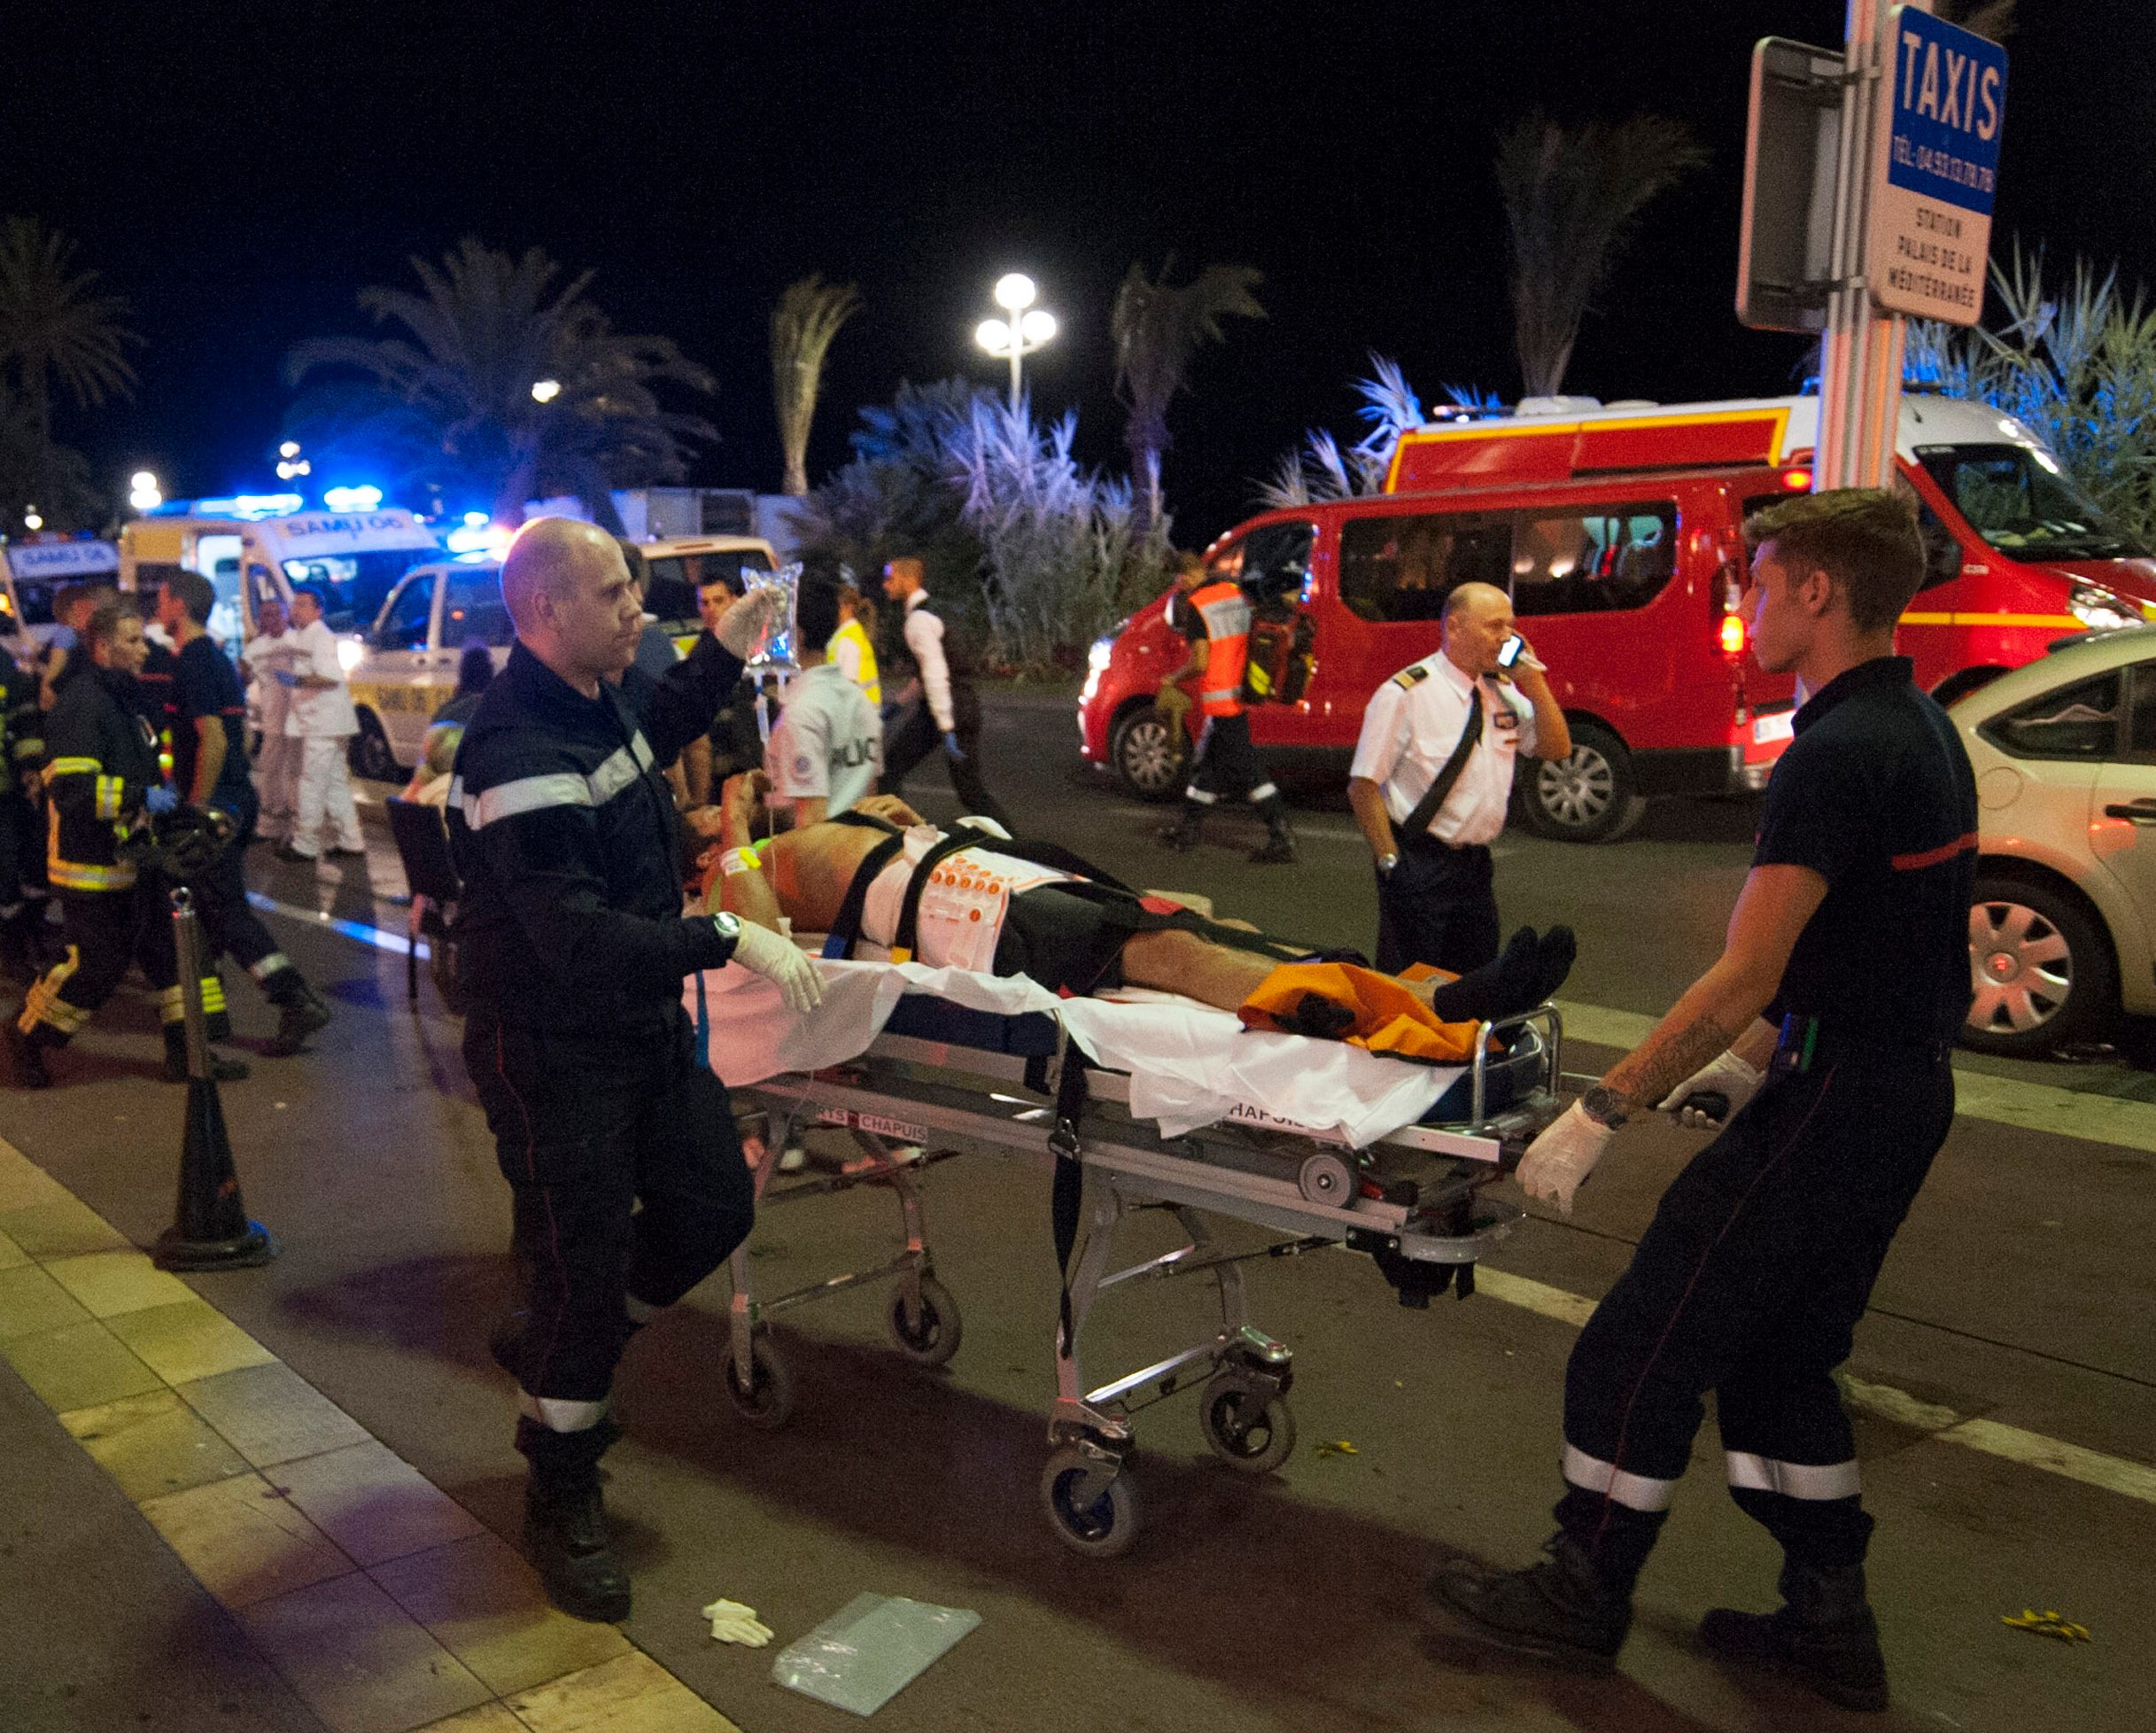 France to extend state of emergency by 3 months following Nice attack